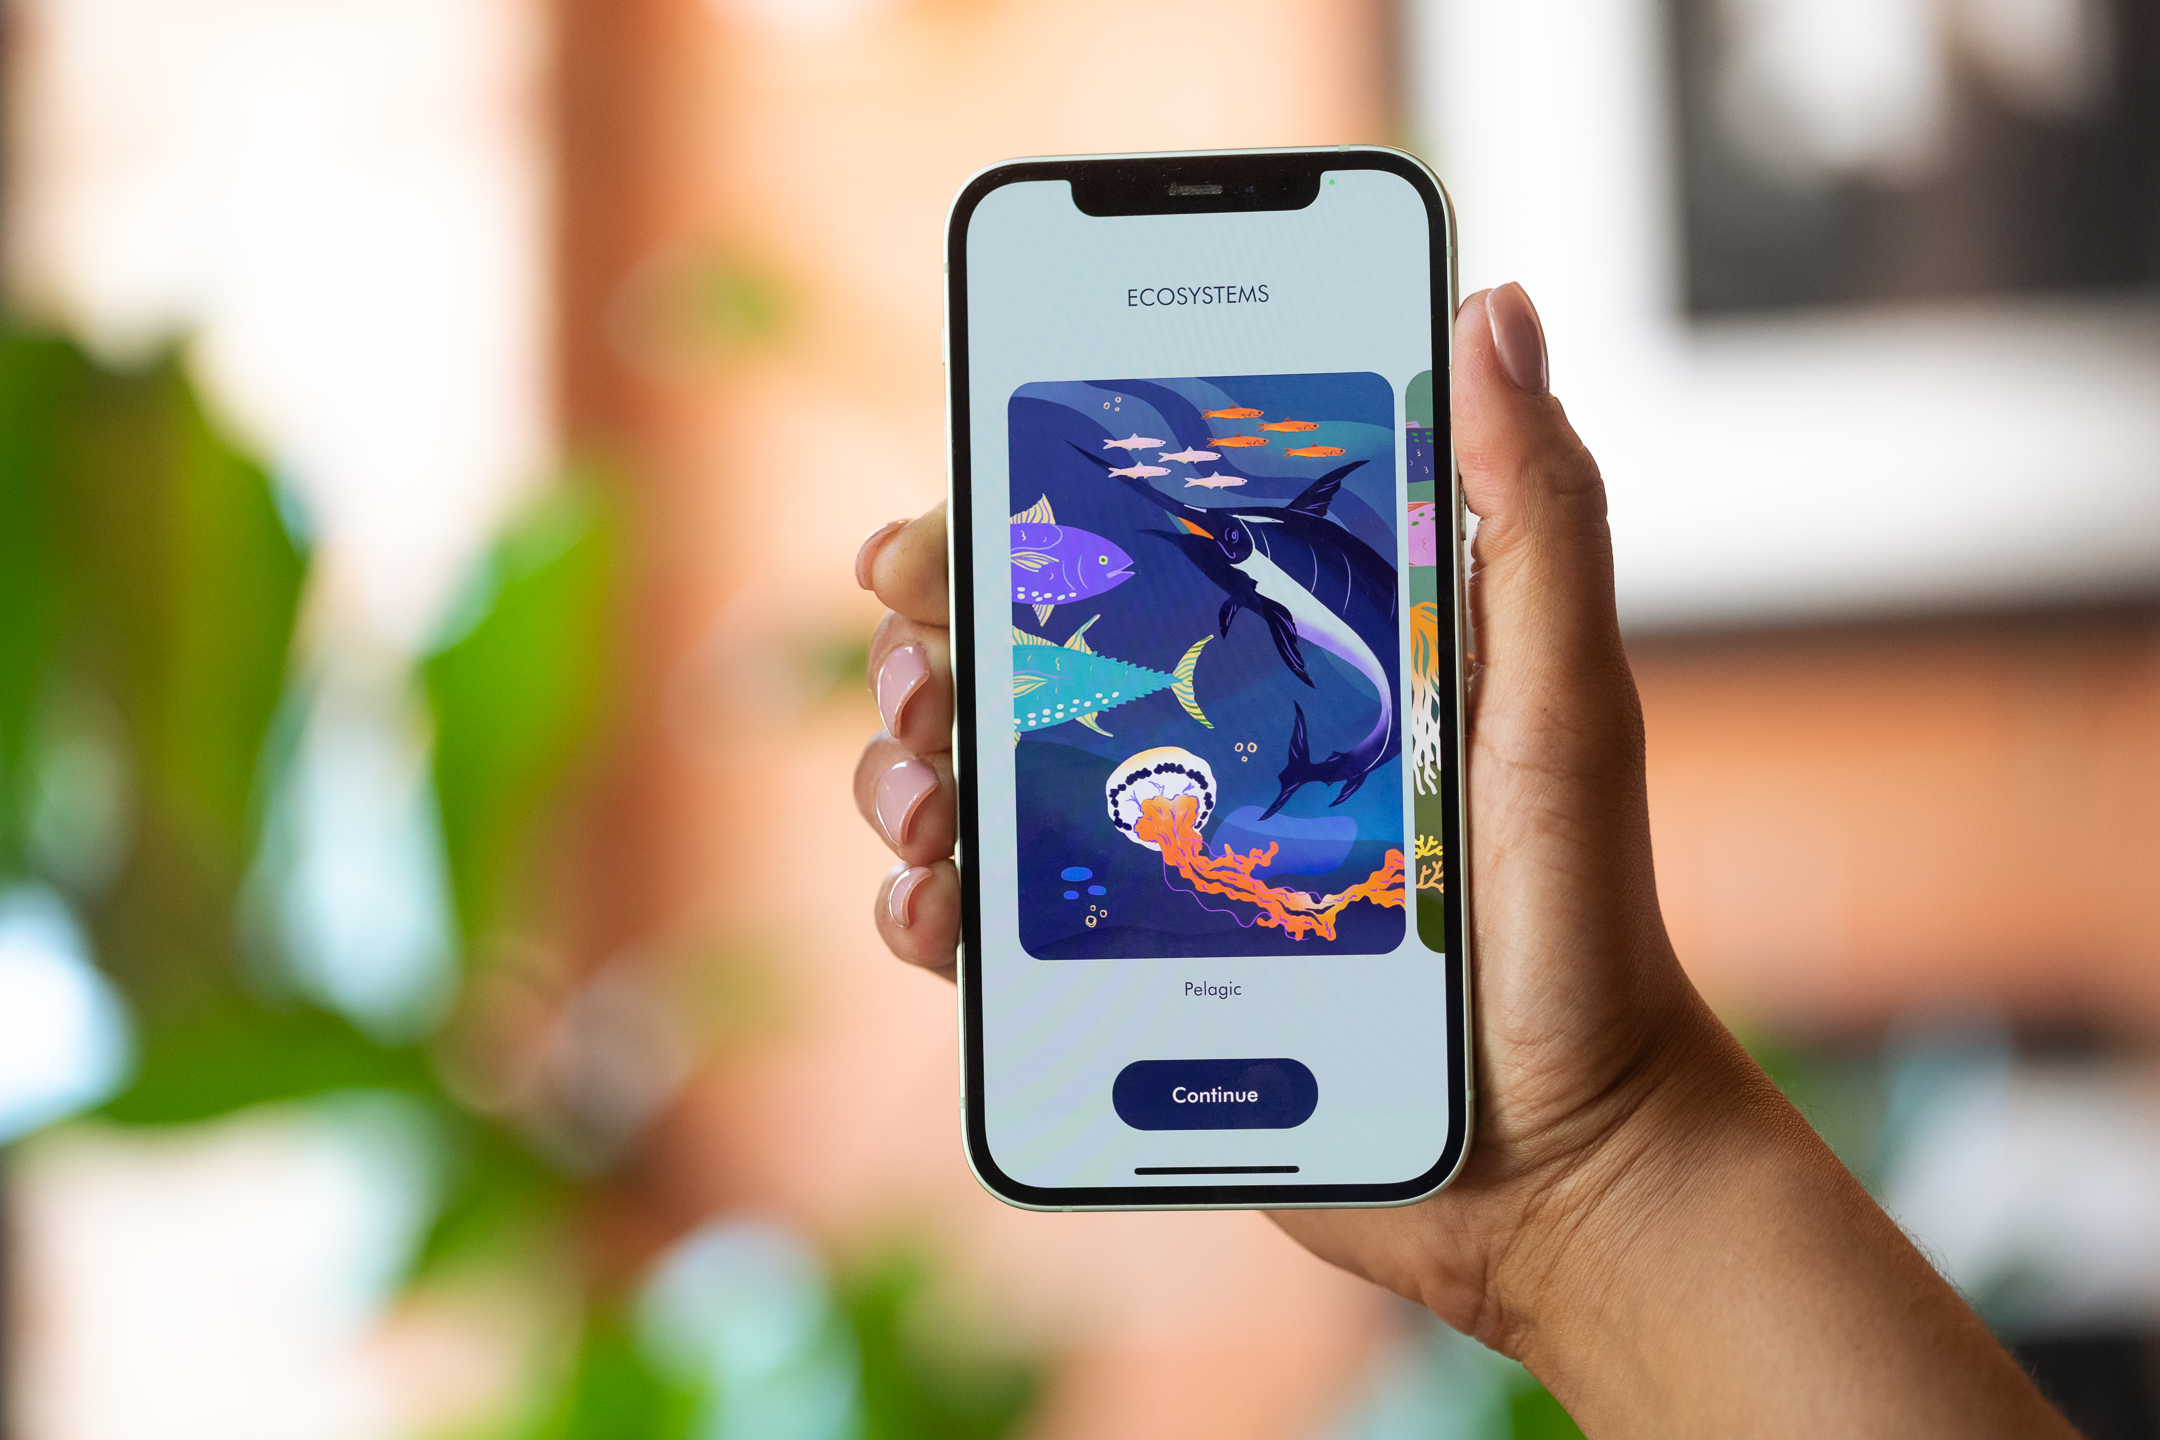 3.	The Aurelia app allows students to explore various underwater environments through the magic of augmented reality, including pelagic, freshwater and coral reef.